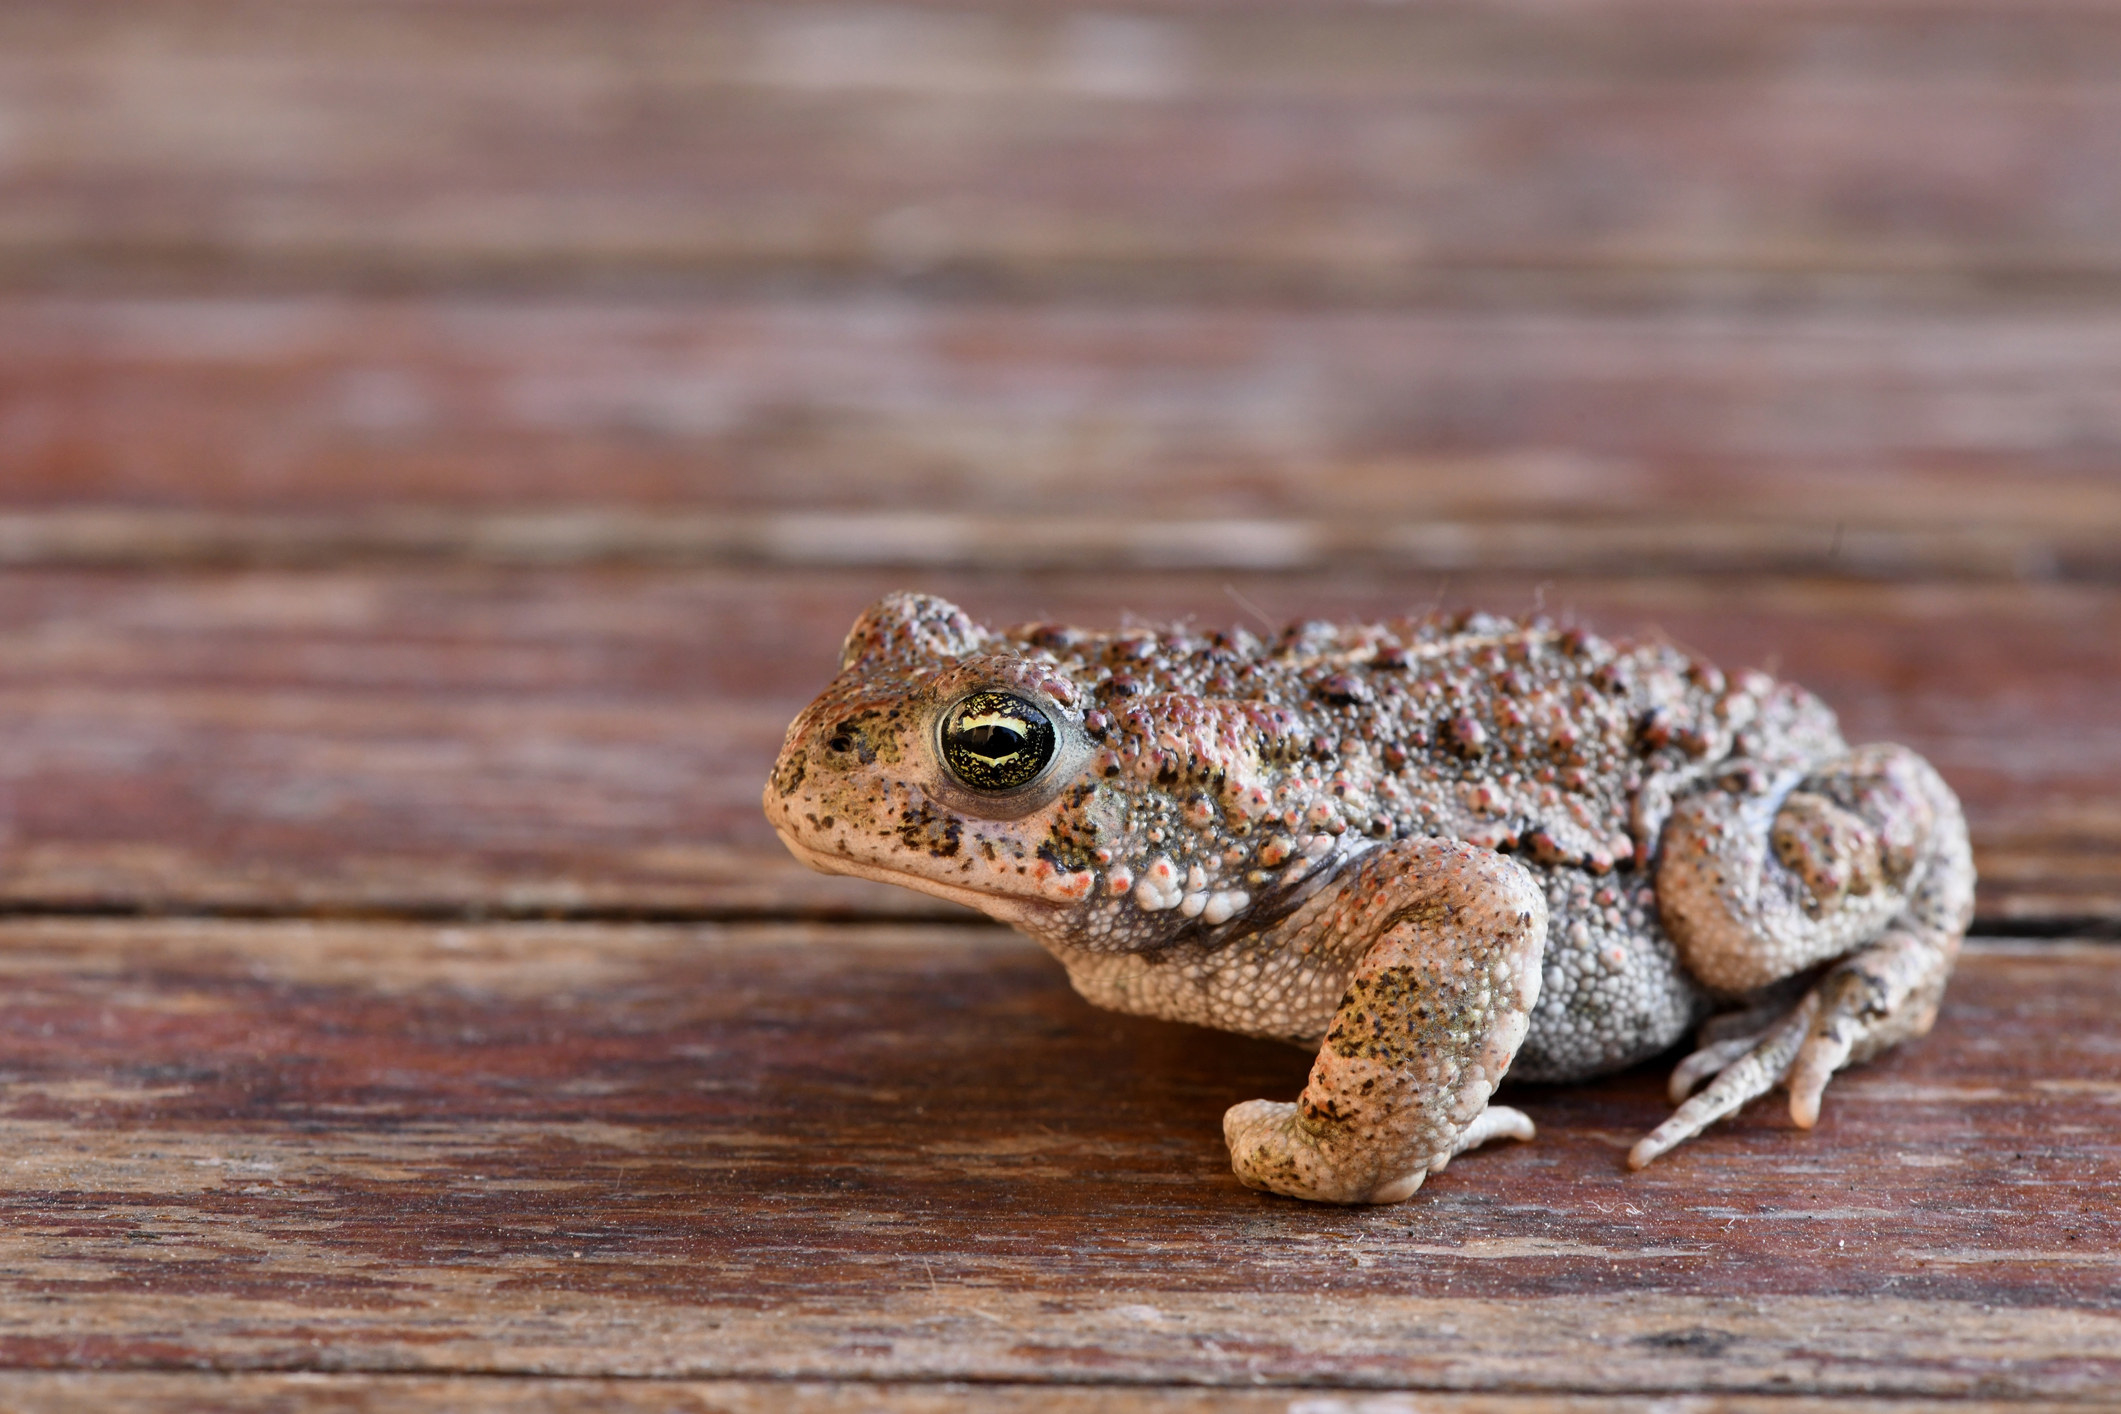 A frog standing on a wooden surface